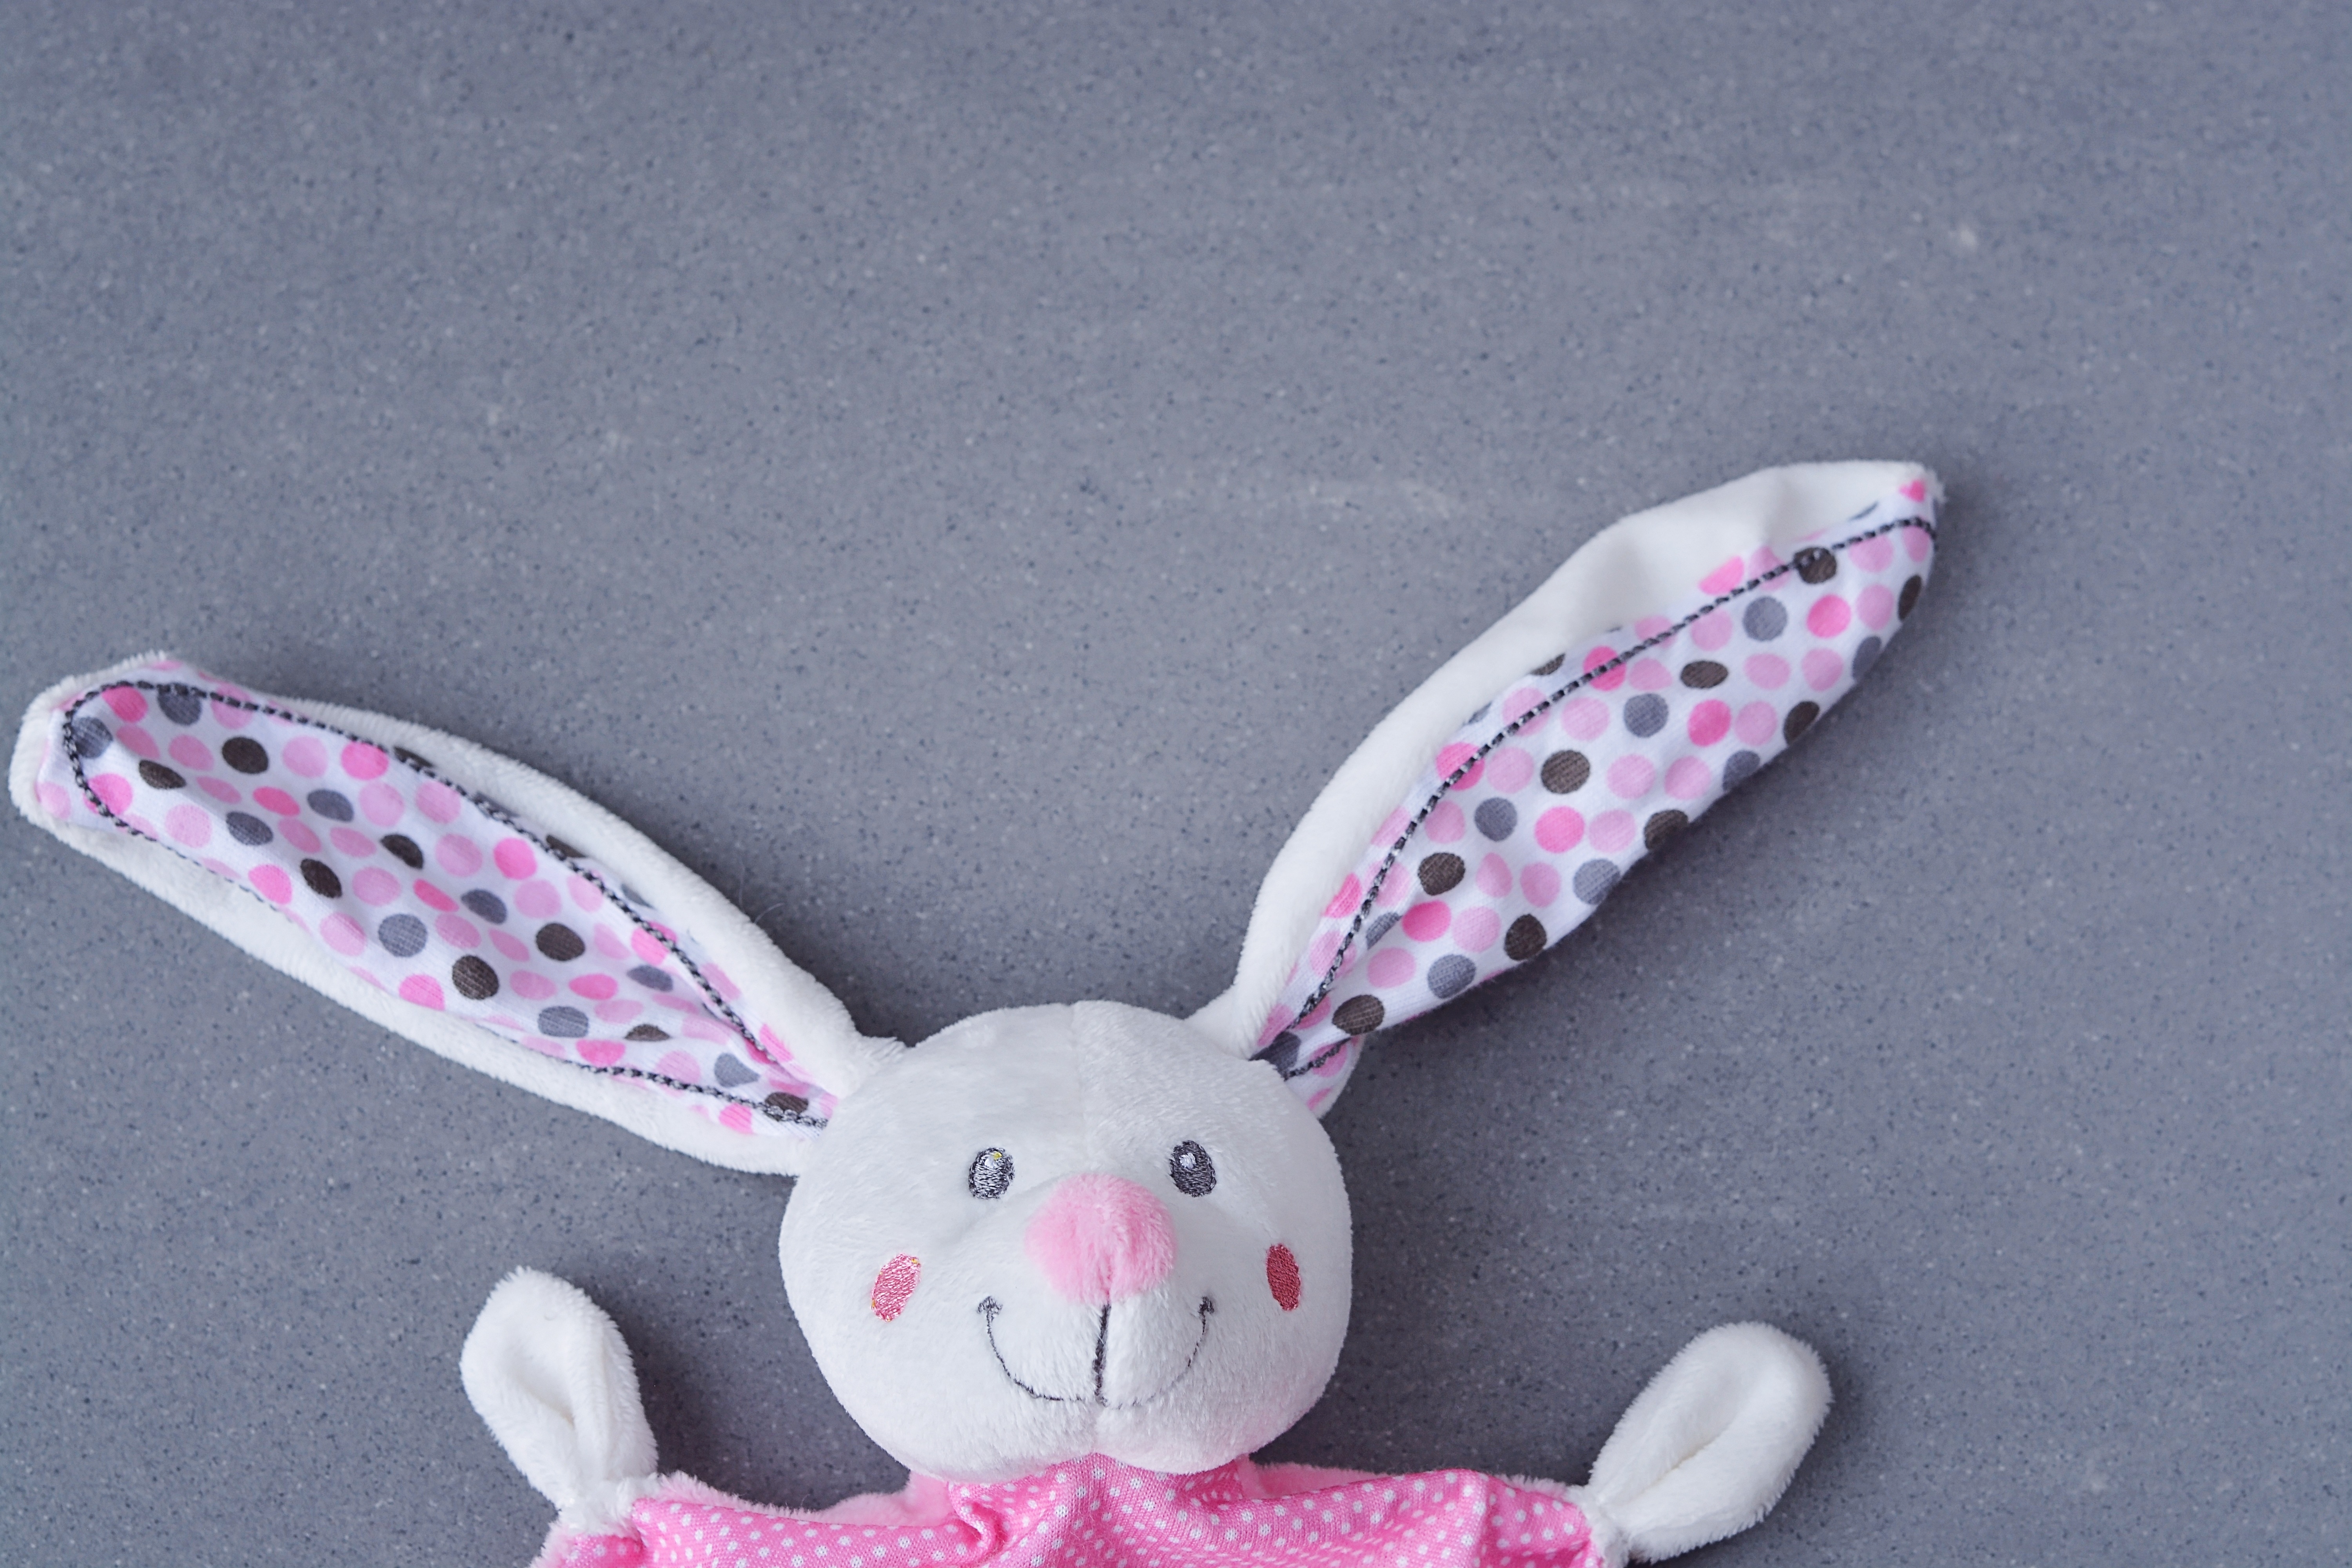 Hare, Fabric Bunny, Security Blanket, pink color, day